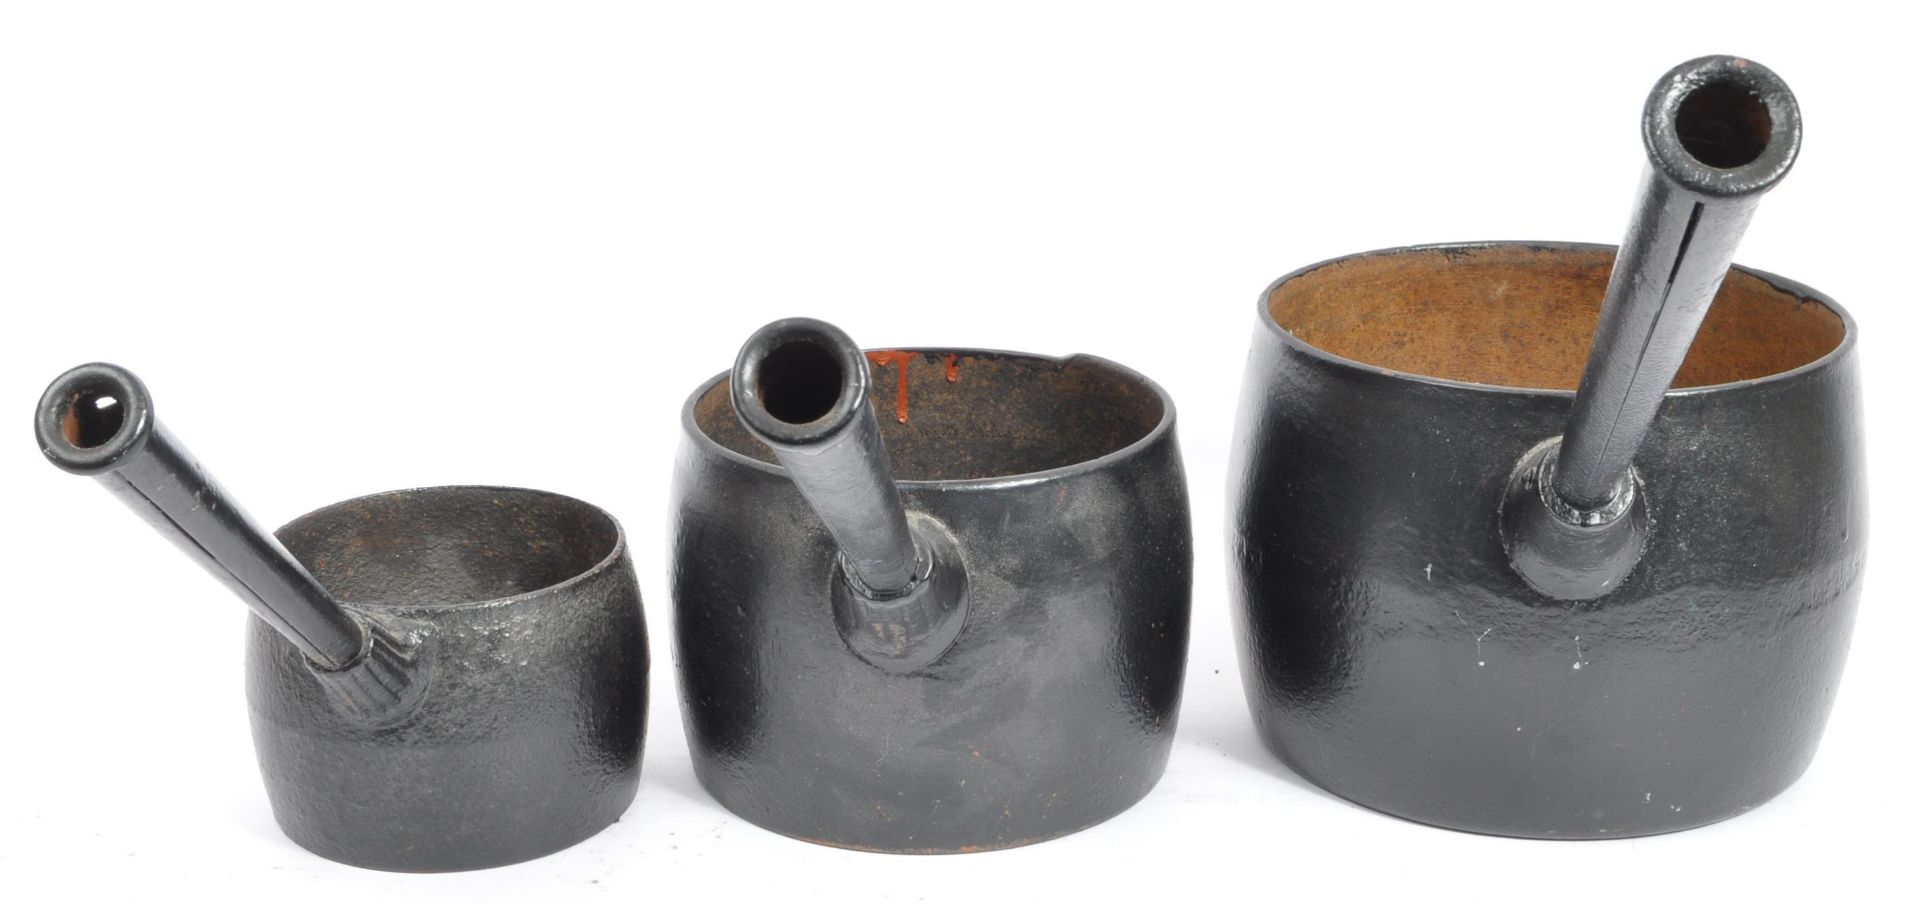 THREE 19TH CENTURY CAST IRON 'GYPSY' COOKING POTS - Image 2 of 3